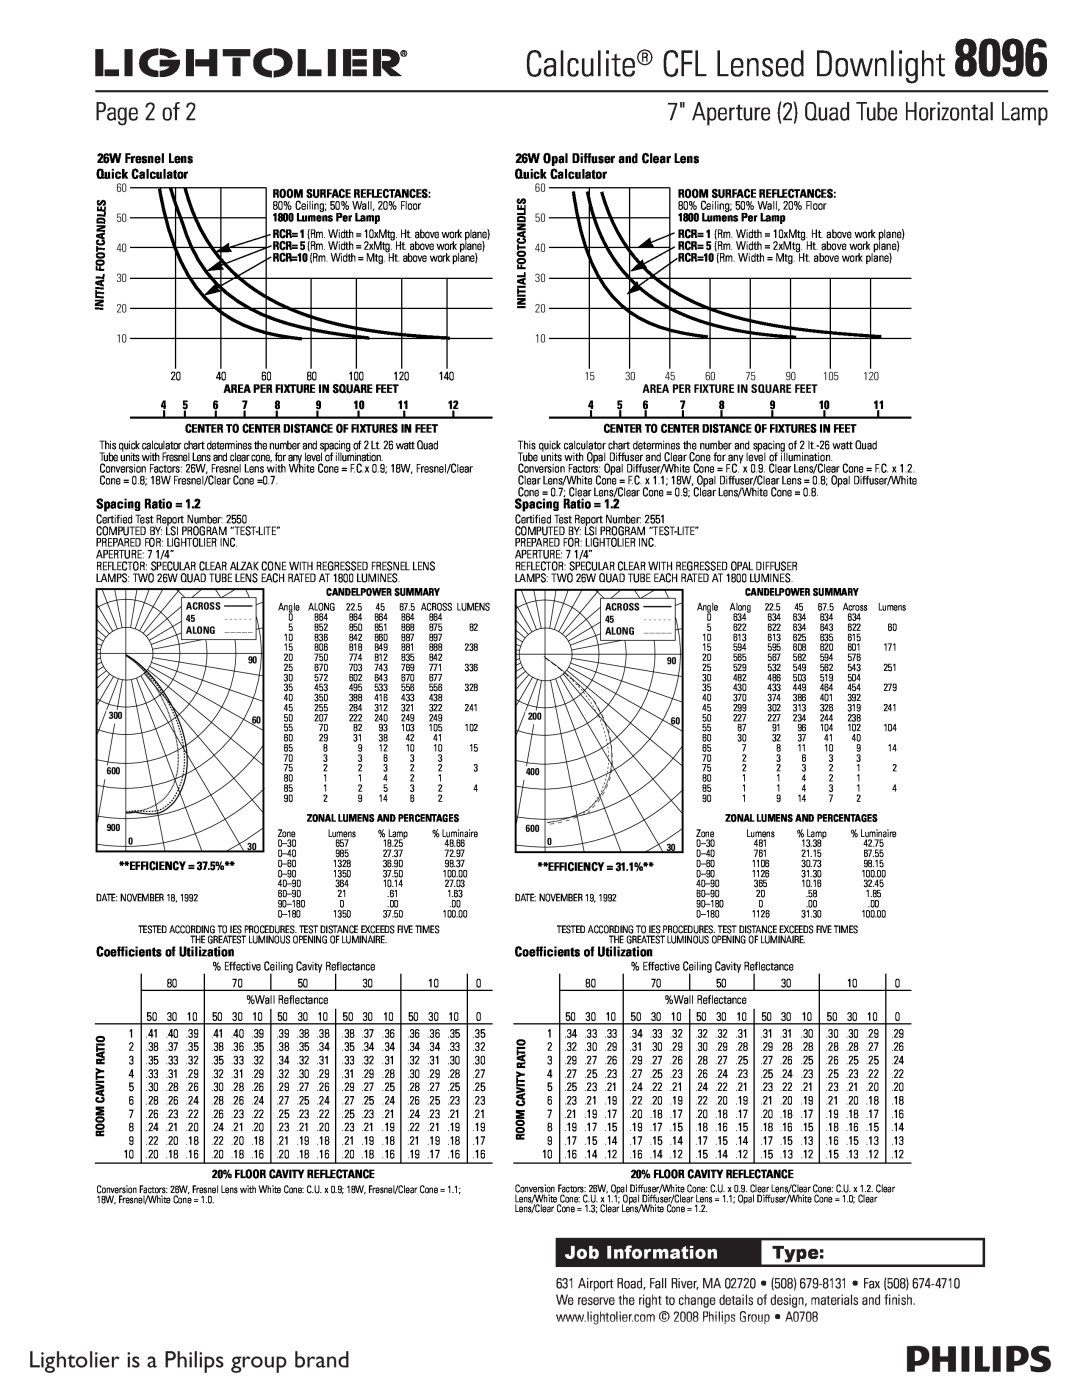 Lightolier 8096 Calculite CFL Lensed Downlight, Page 2 of, Lightolier is a Philips group brand, Job Information, Type 